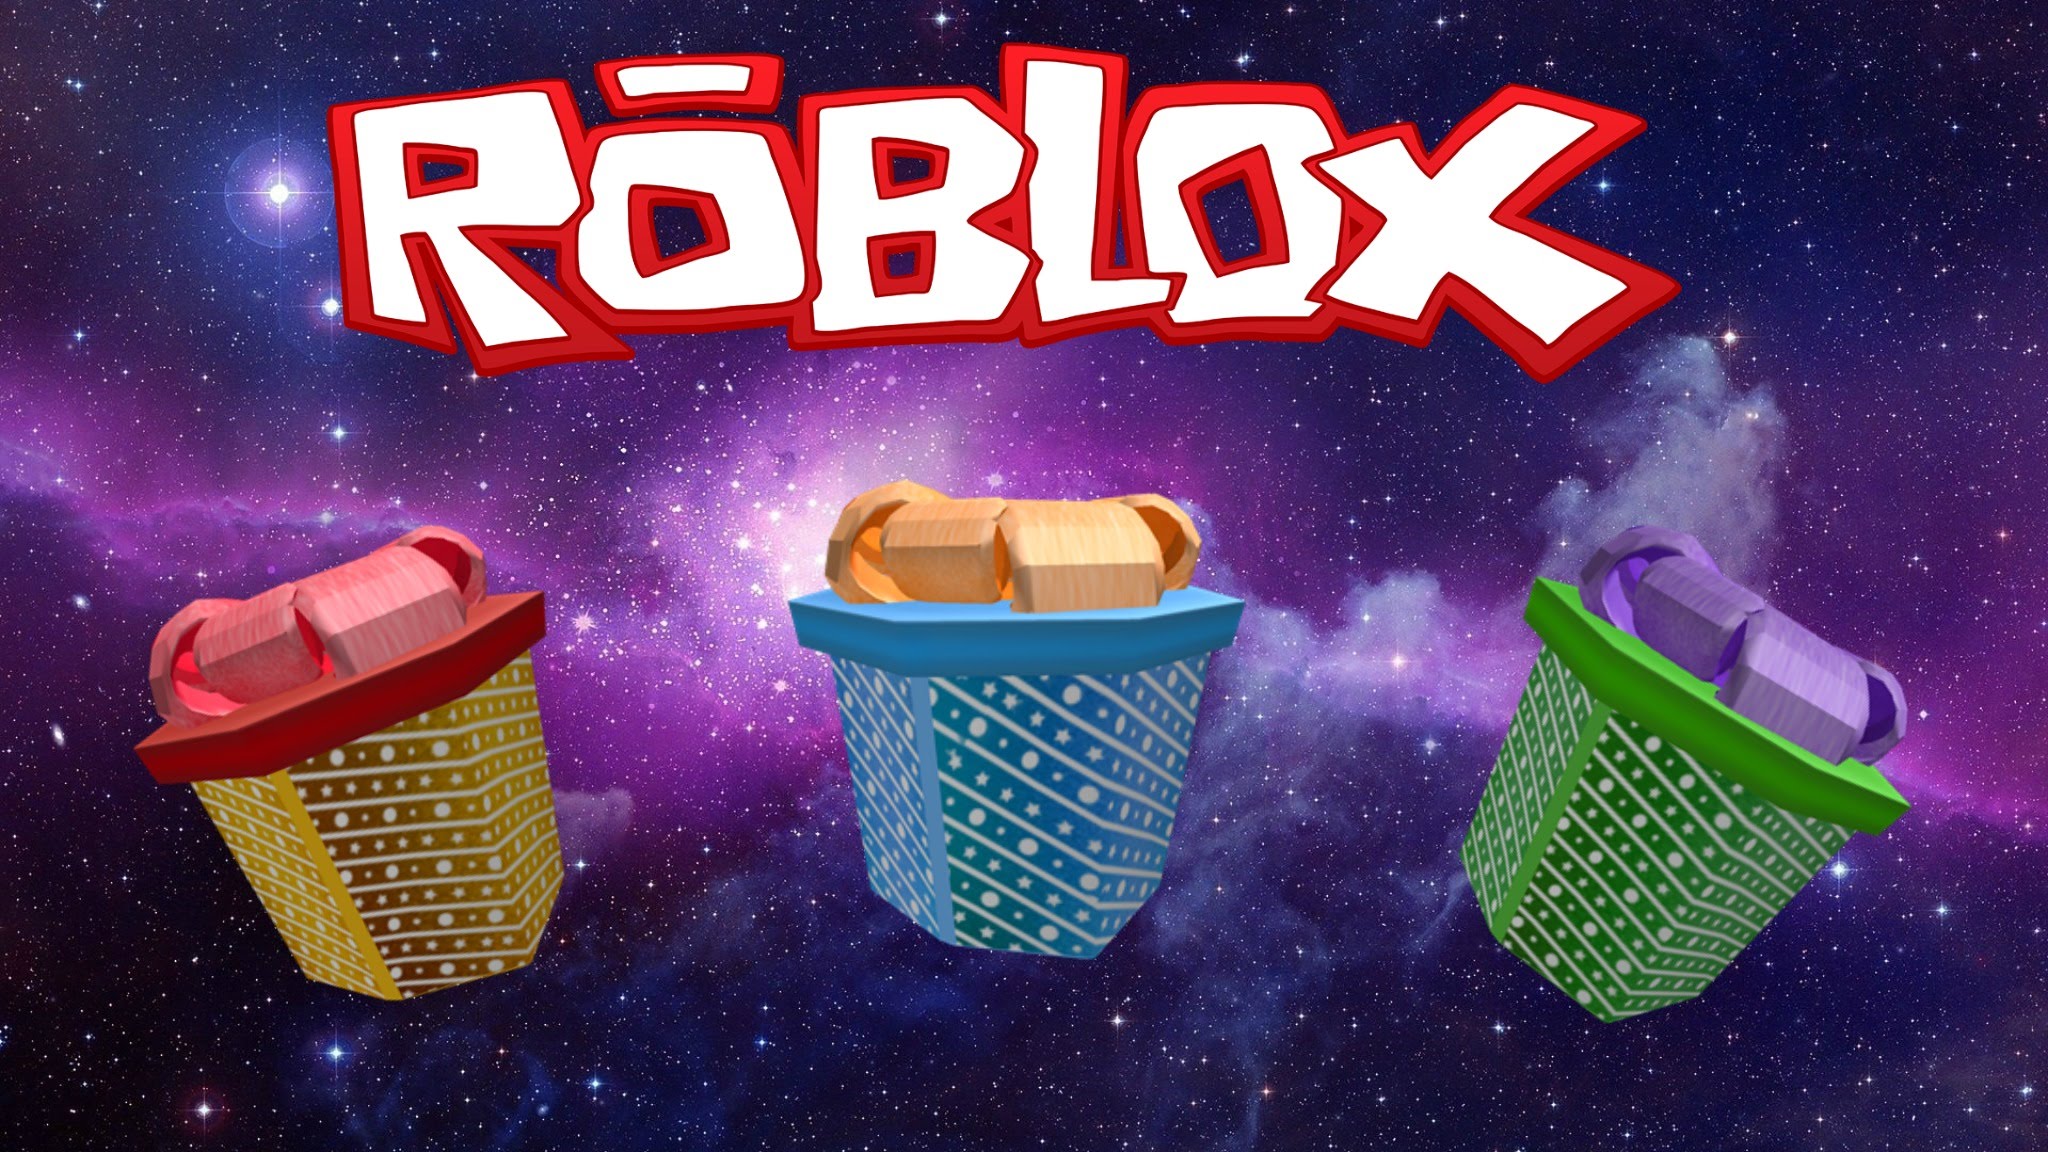 Roblox Pictures 2048 Pixels Wide And 1152 Pixels Tall